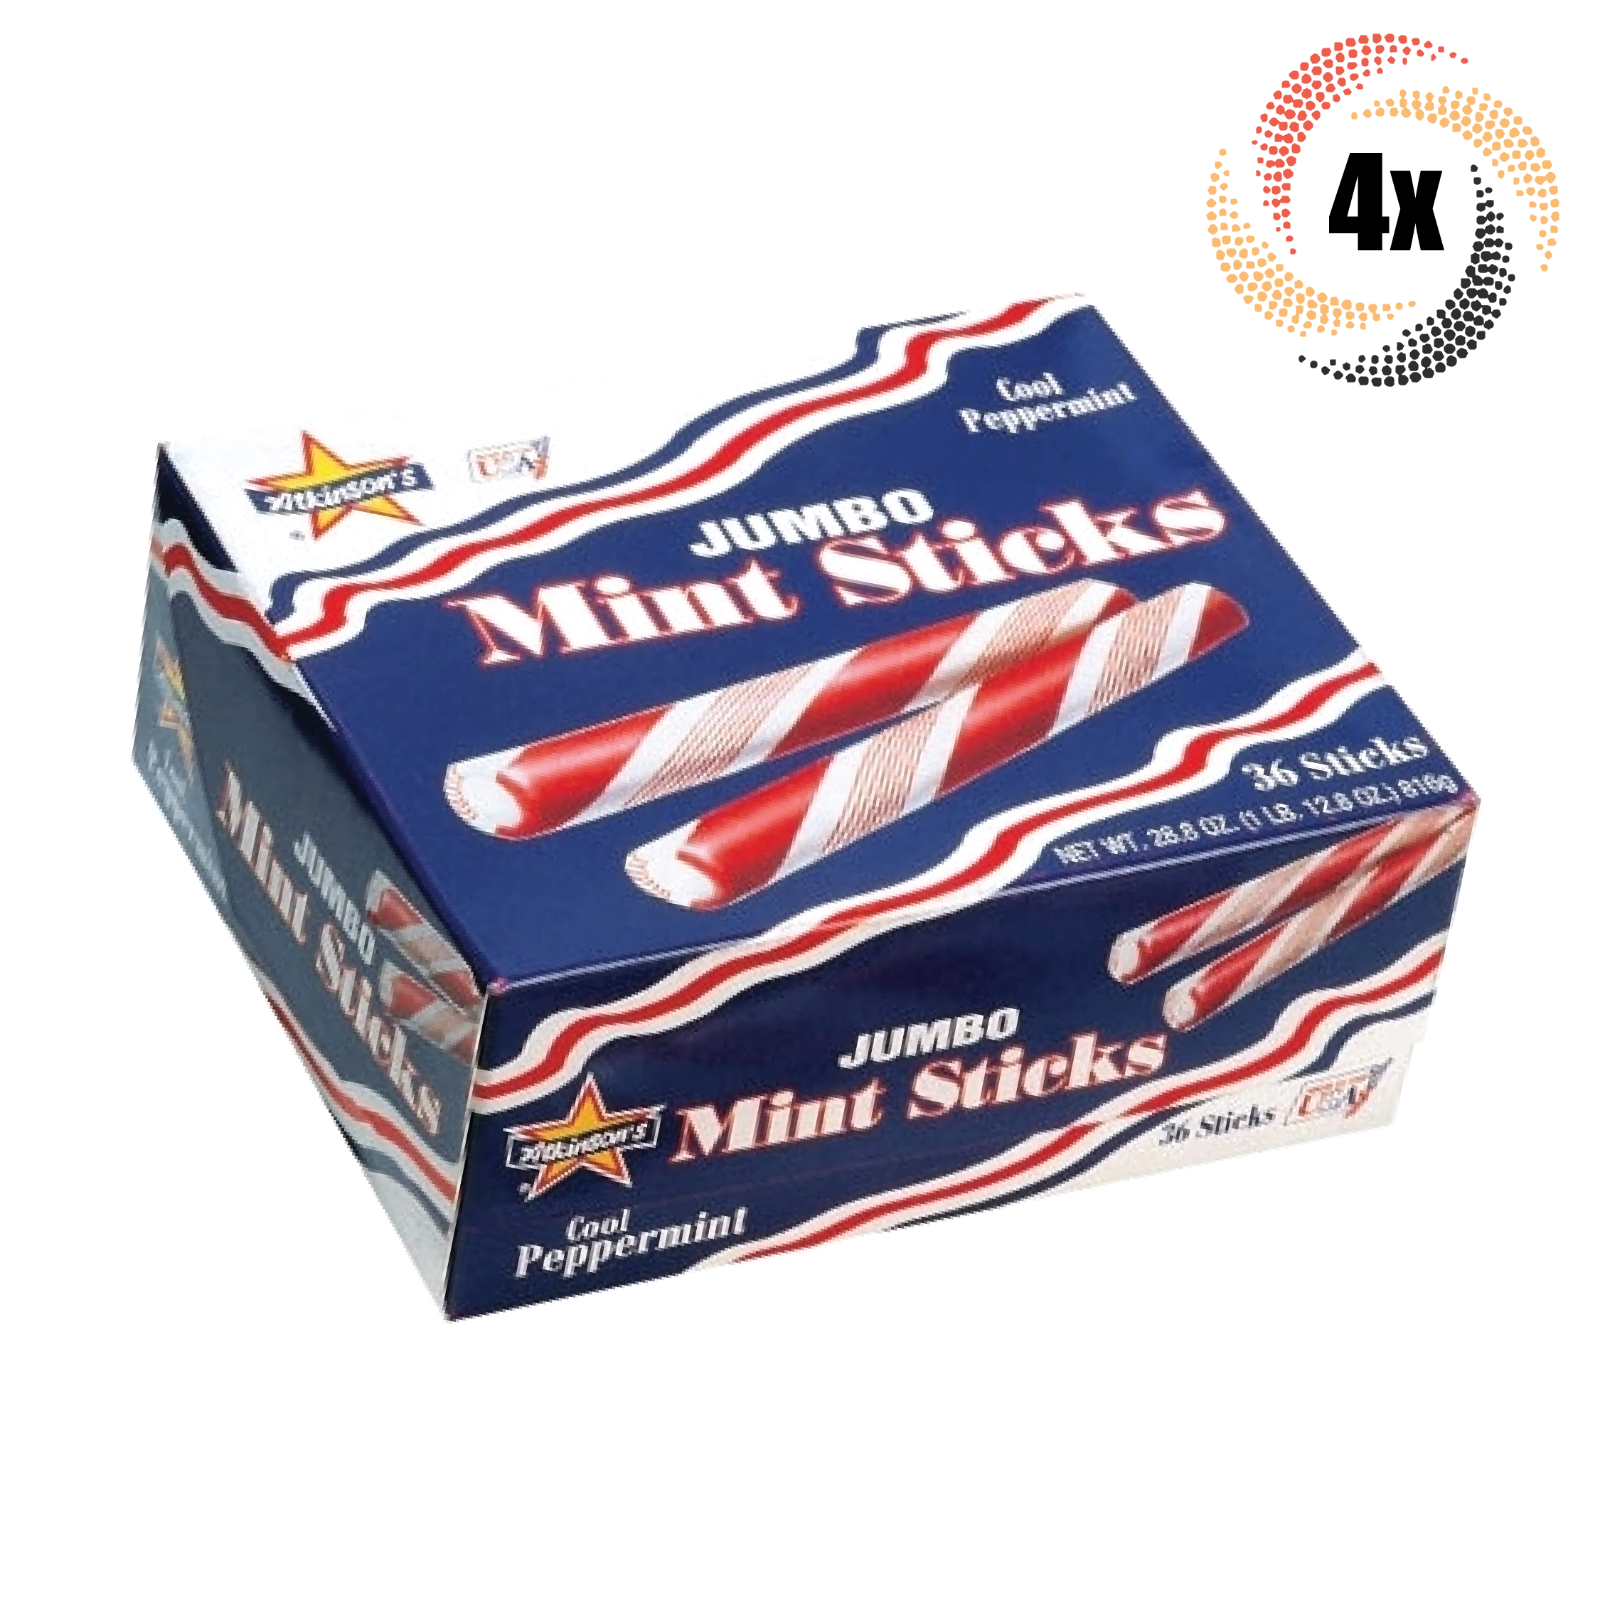 Primary image for 4x Boxes Atkinson's Jumbo Mint Sticks Cool Peppermint Flavor Candy | 36 Sticks